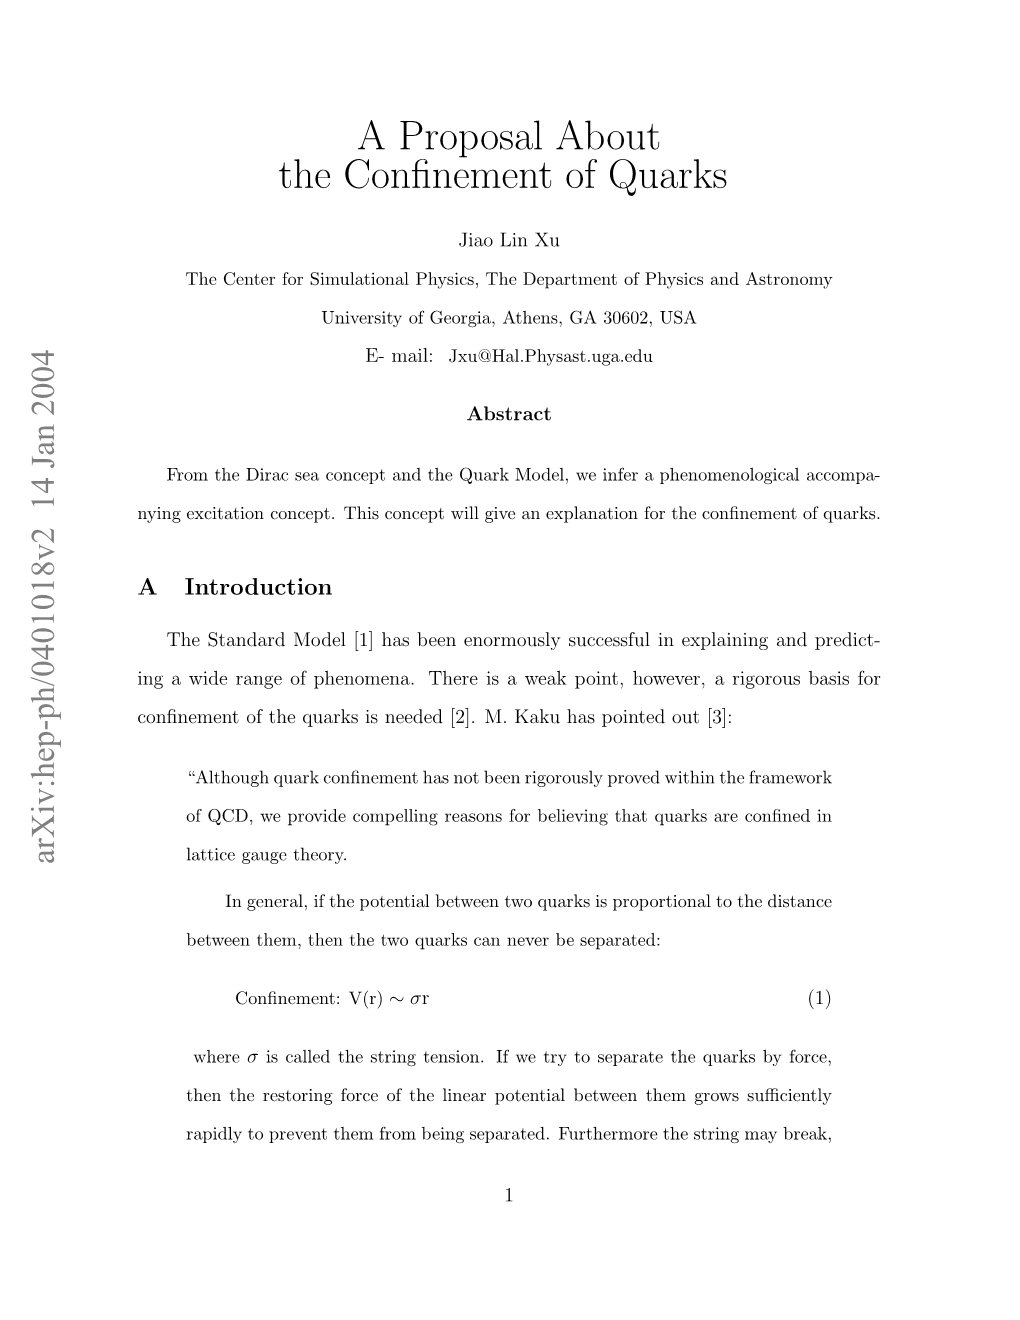 A Proposal About the Confinement of Quarks